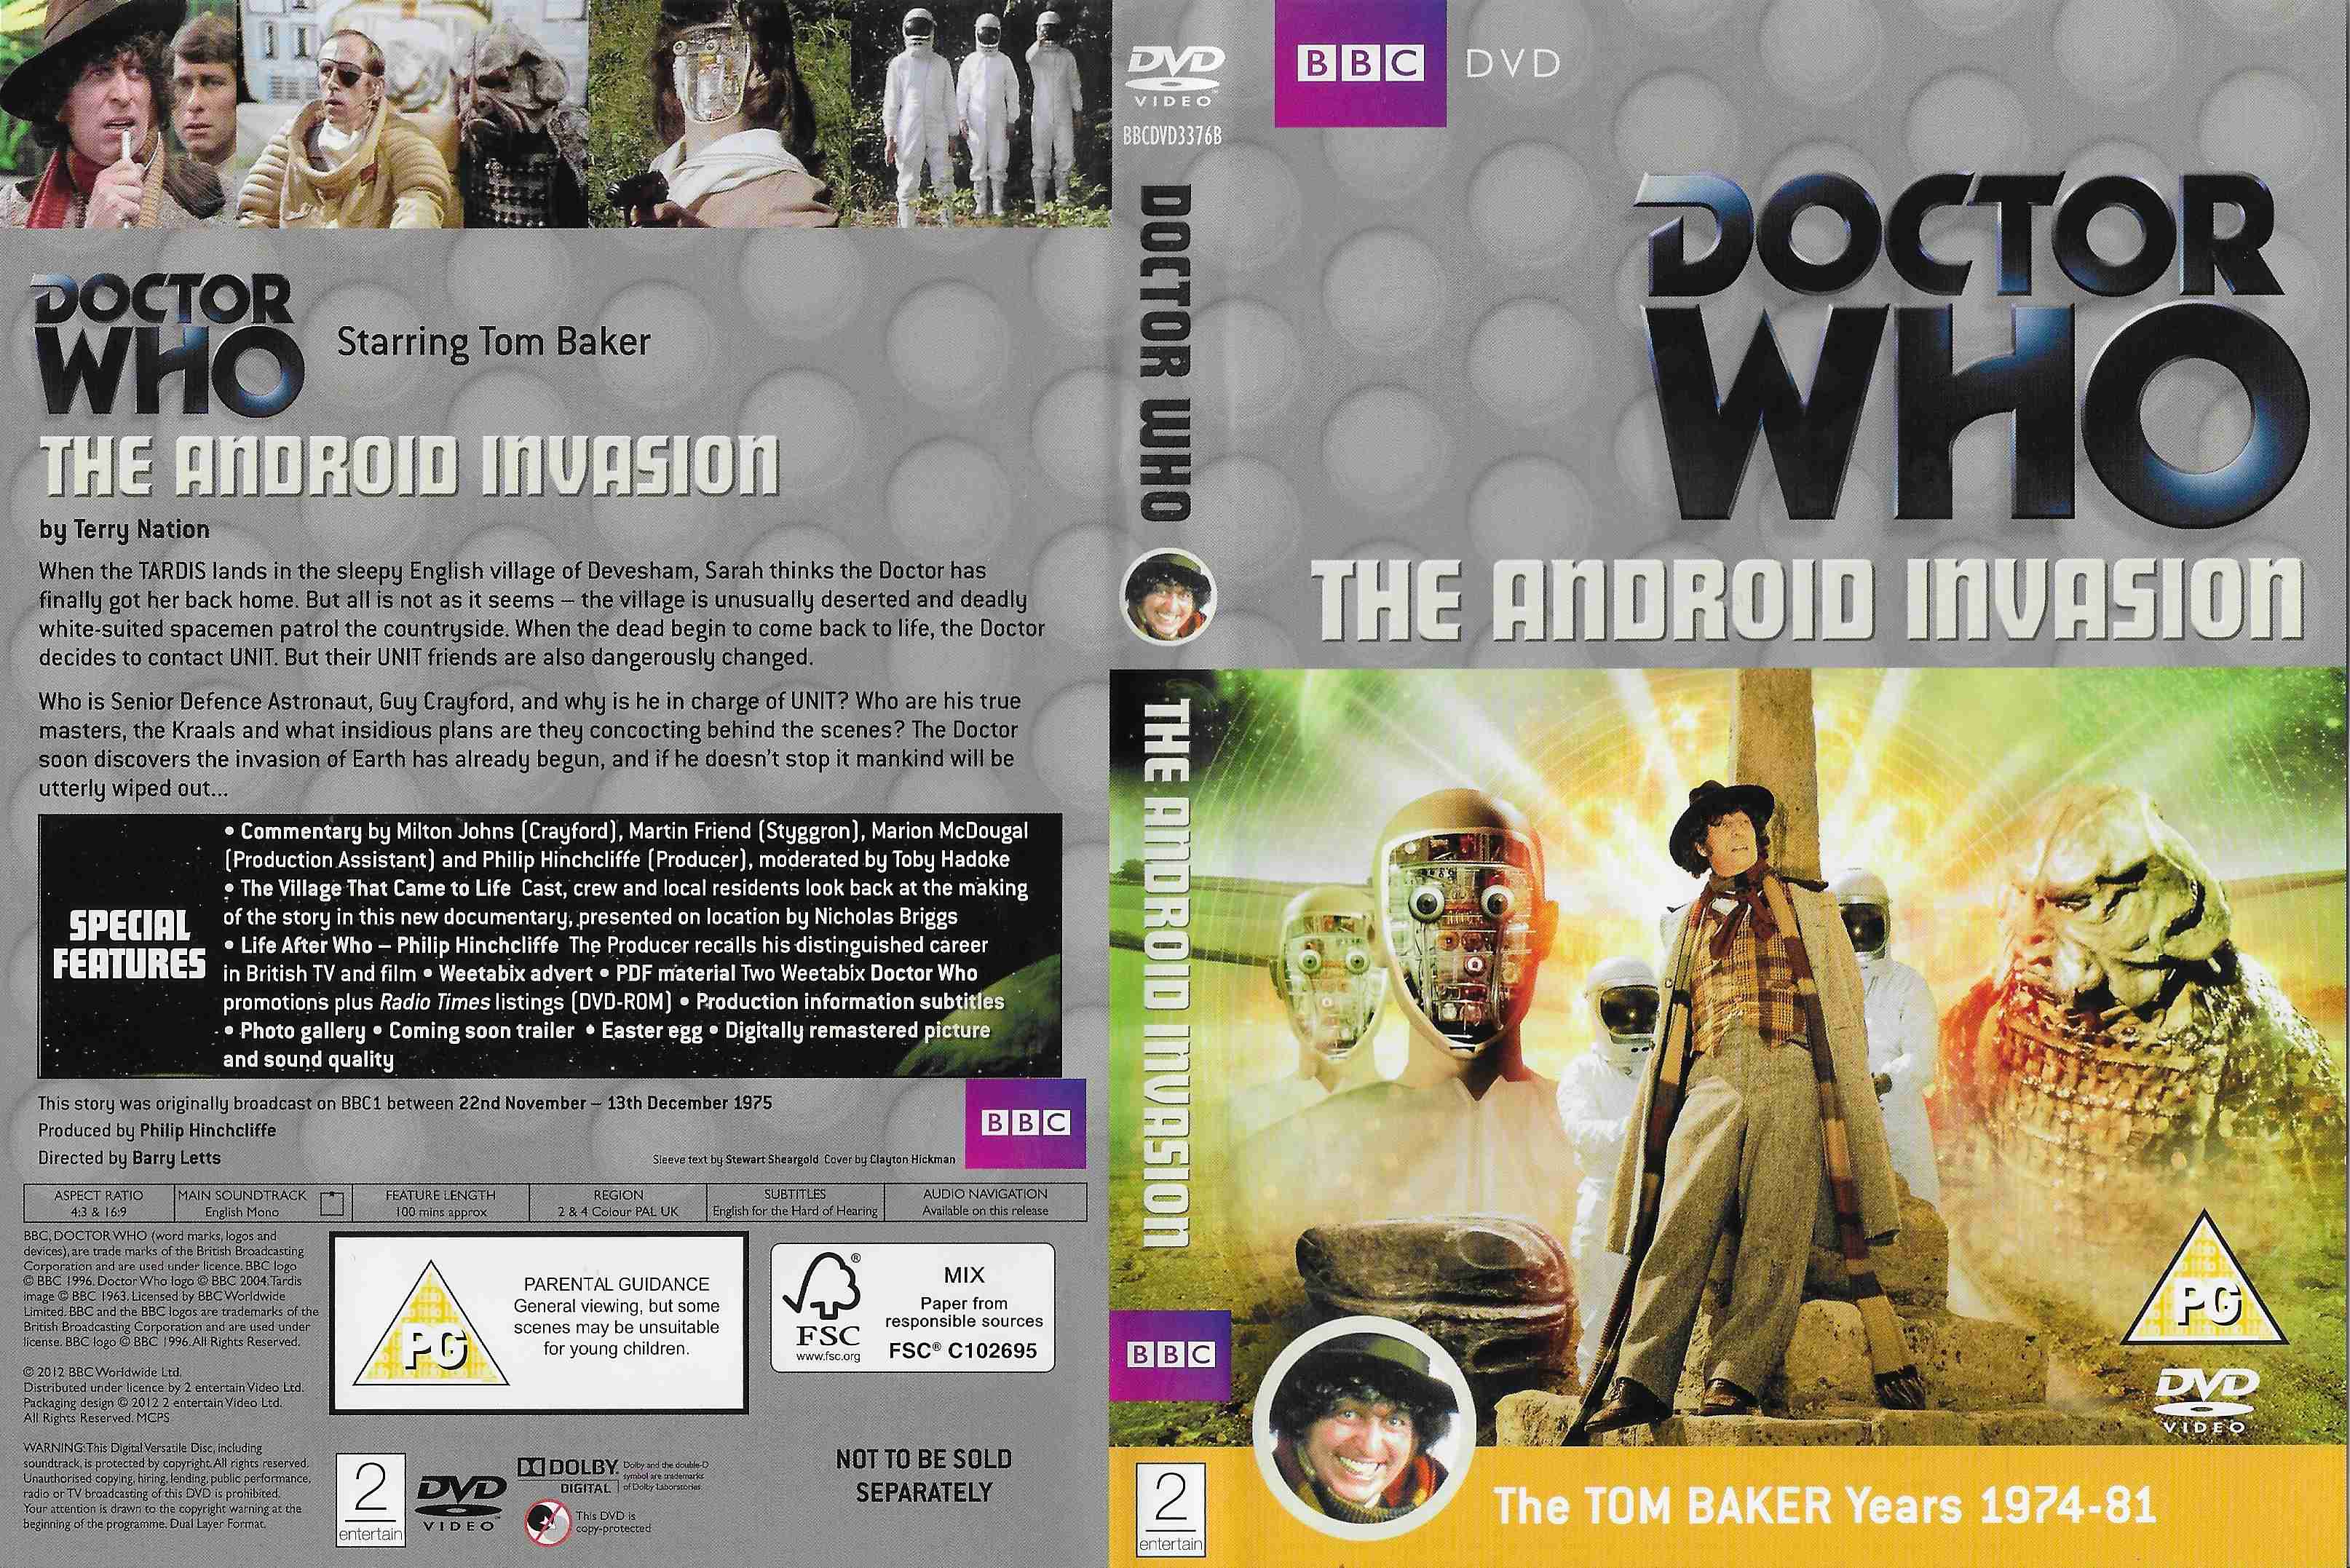 Picture of BBCDVD 3376B Doctor Who - The android invasion by artist Terry Nation from the BBC records and Tapes library